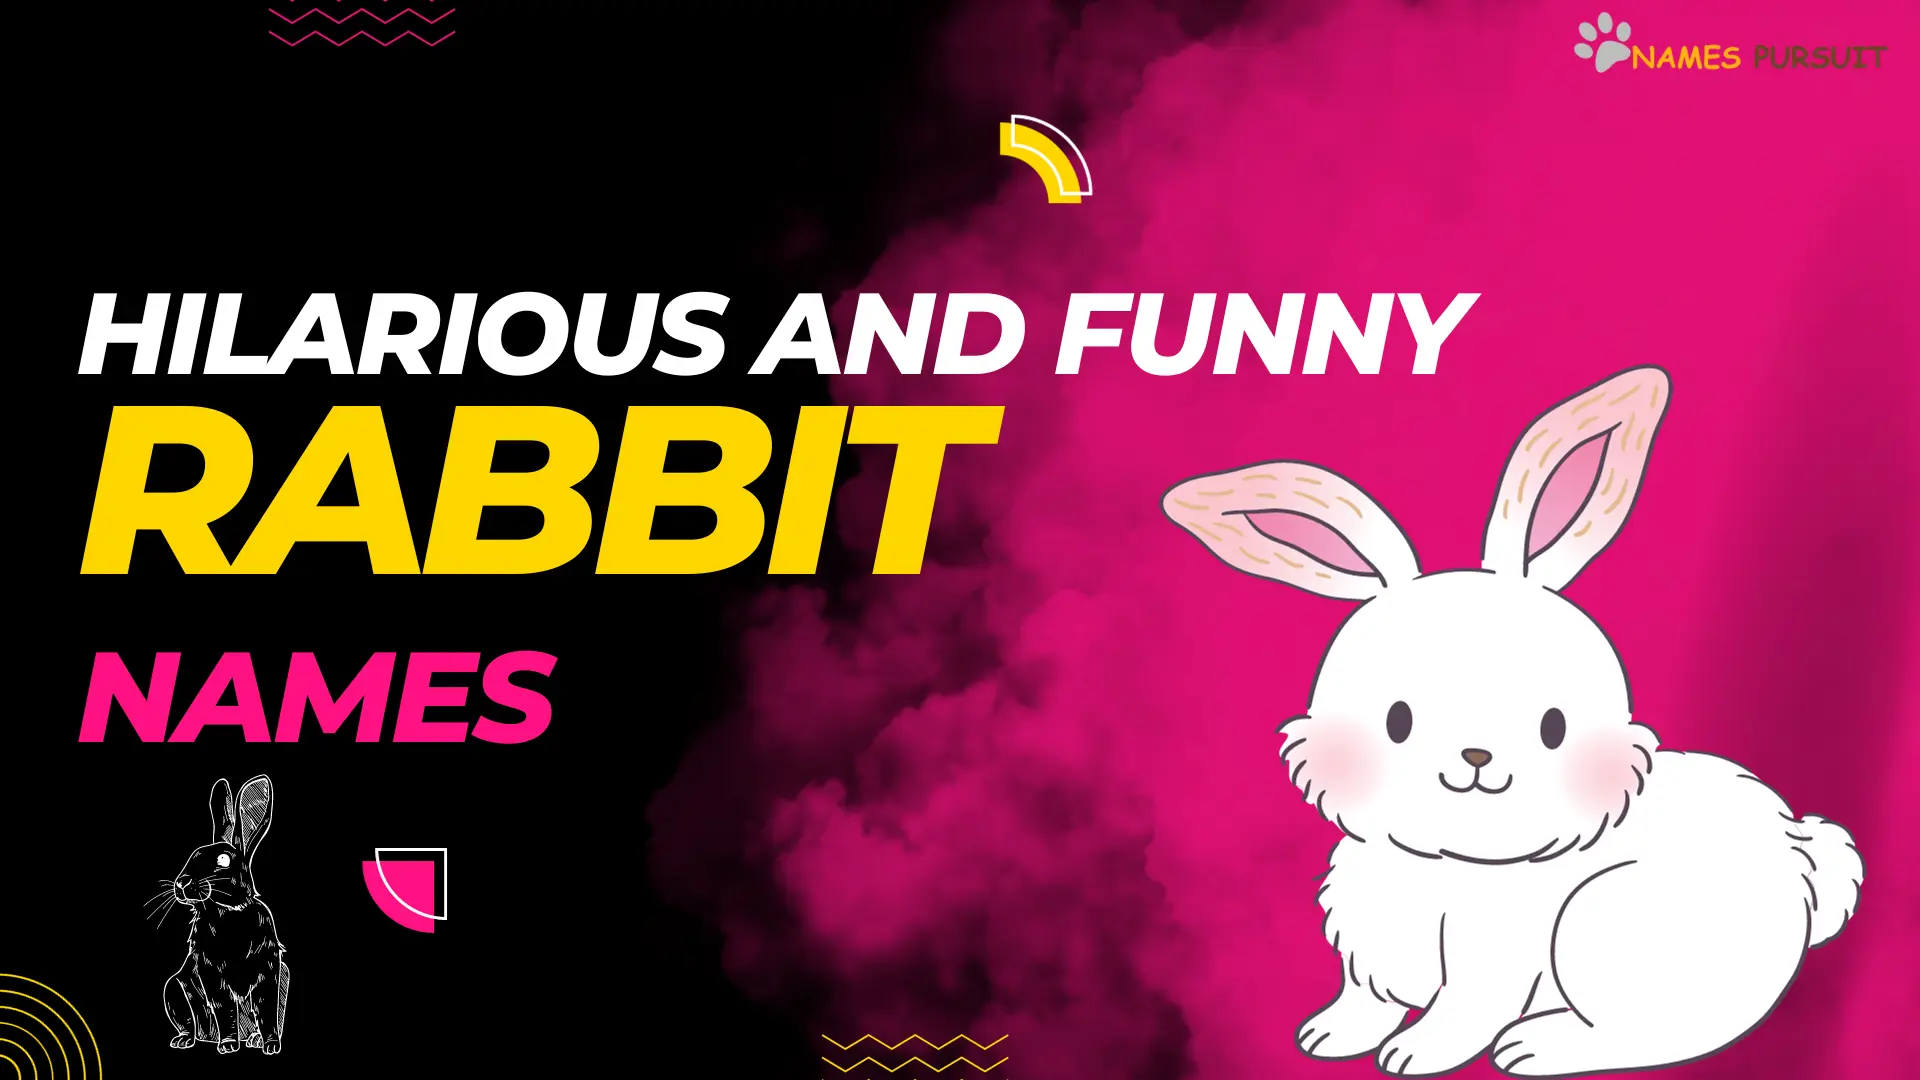 Hilarious and Funny Rabbit Names